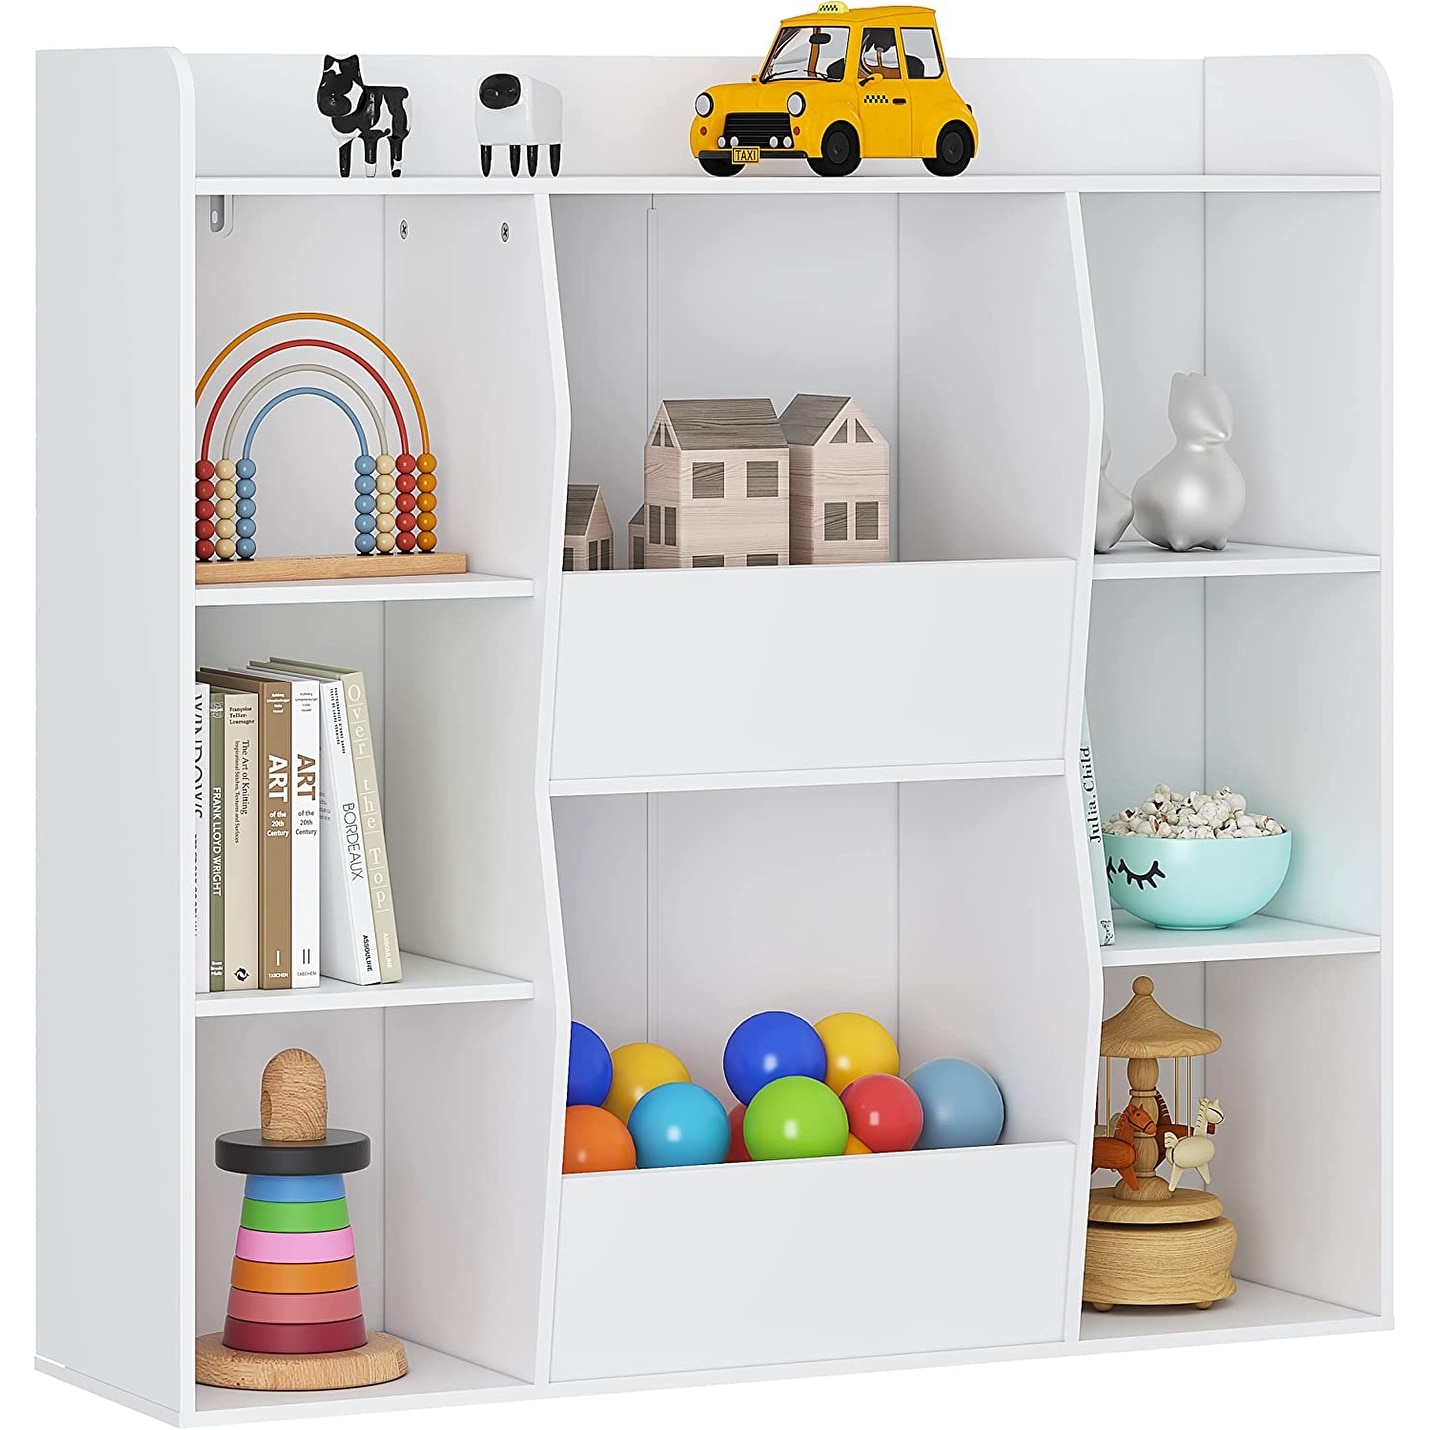 UTEX Toy Storage Organizer with Bookcase, Kid's Bin Storage Unit with 8  Compartments &3 Baskets, Toys Box, Multi Shelf Cubby for Books,Toys,White